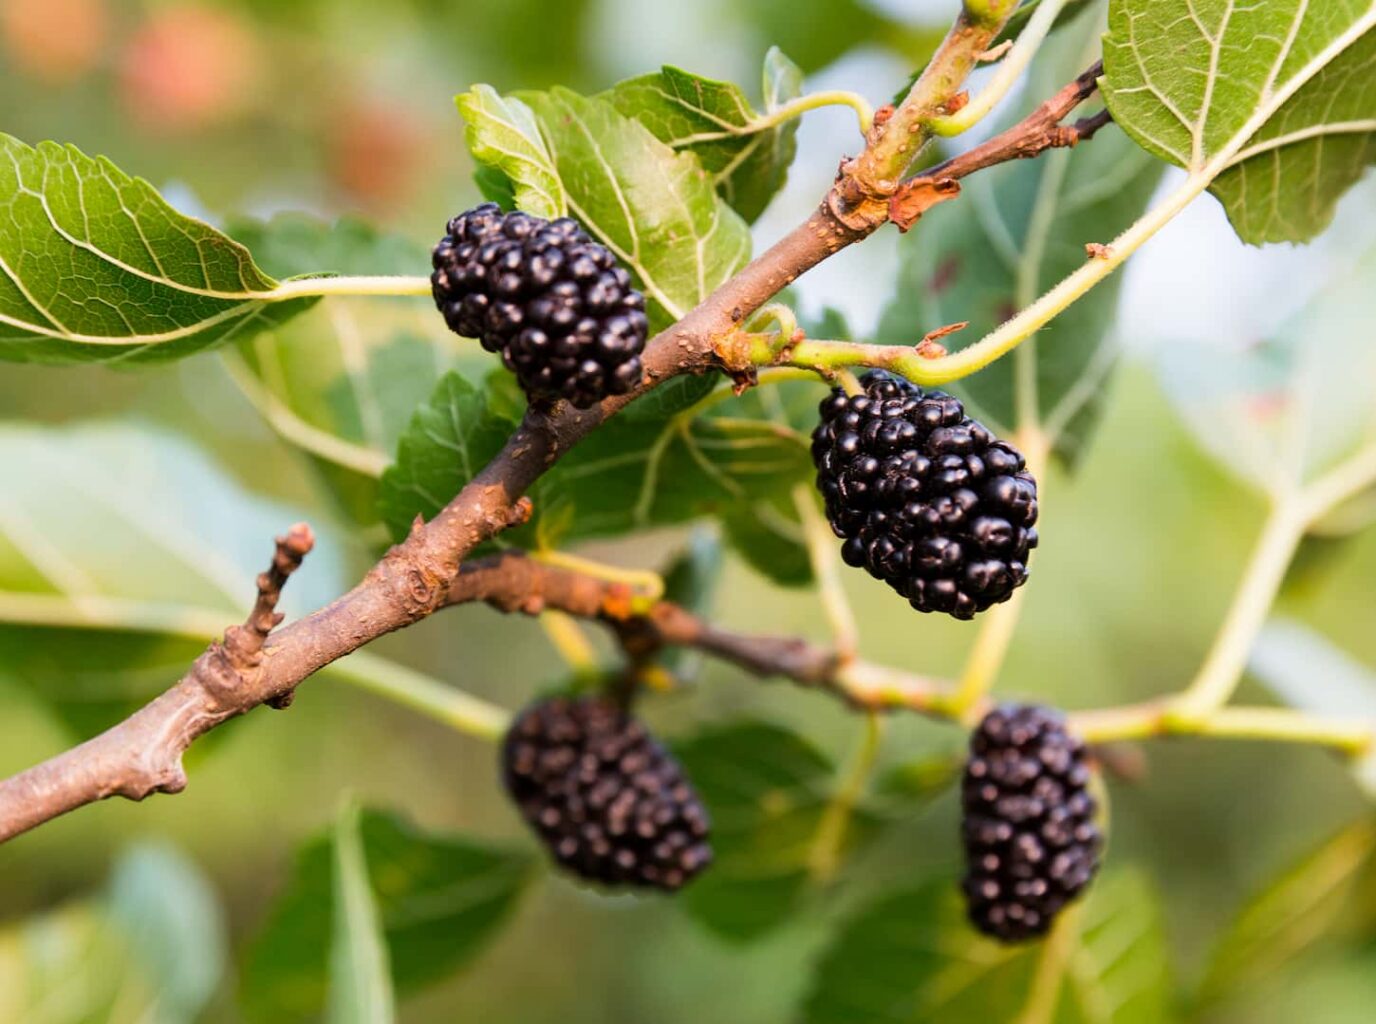 A close-up image of mulberries growing on trees.